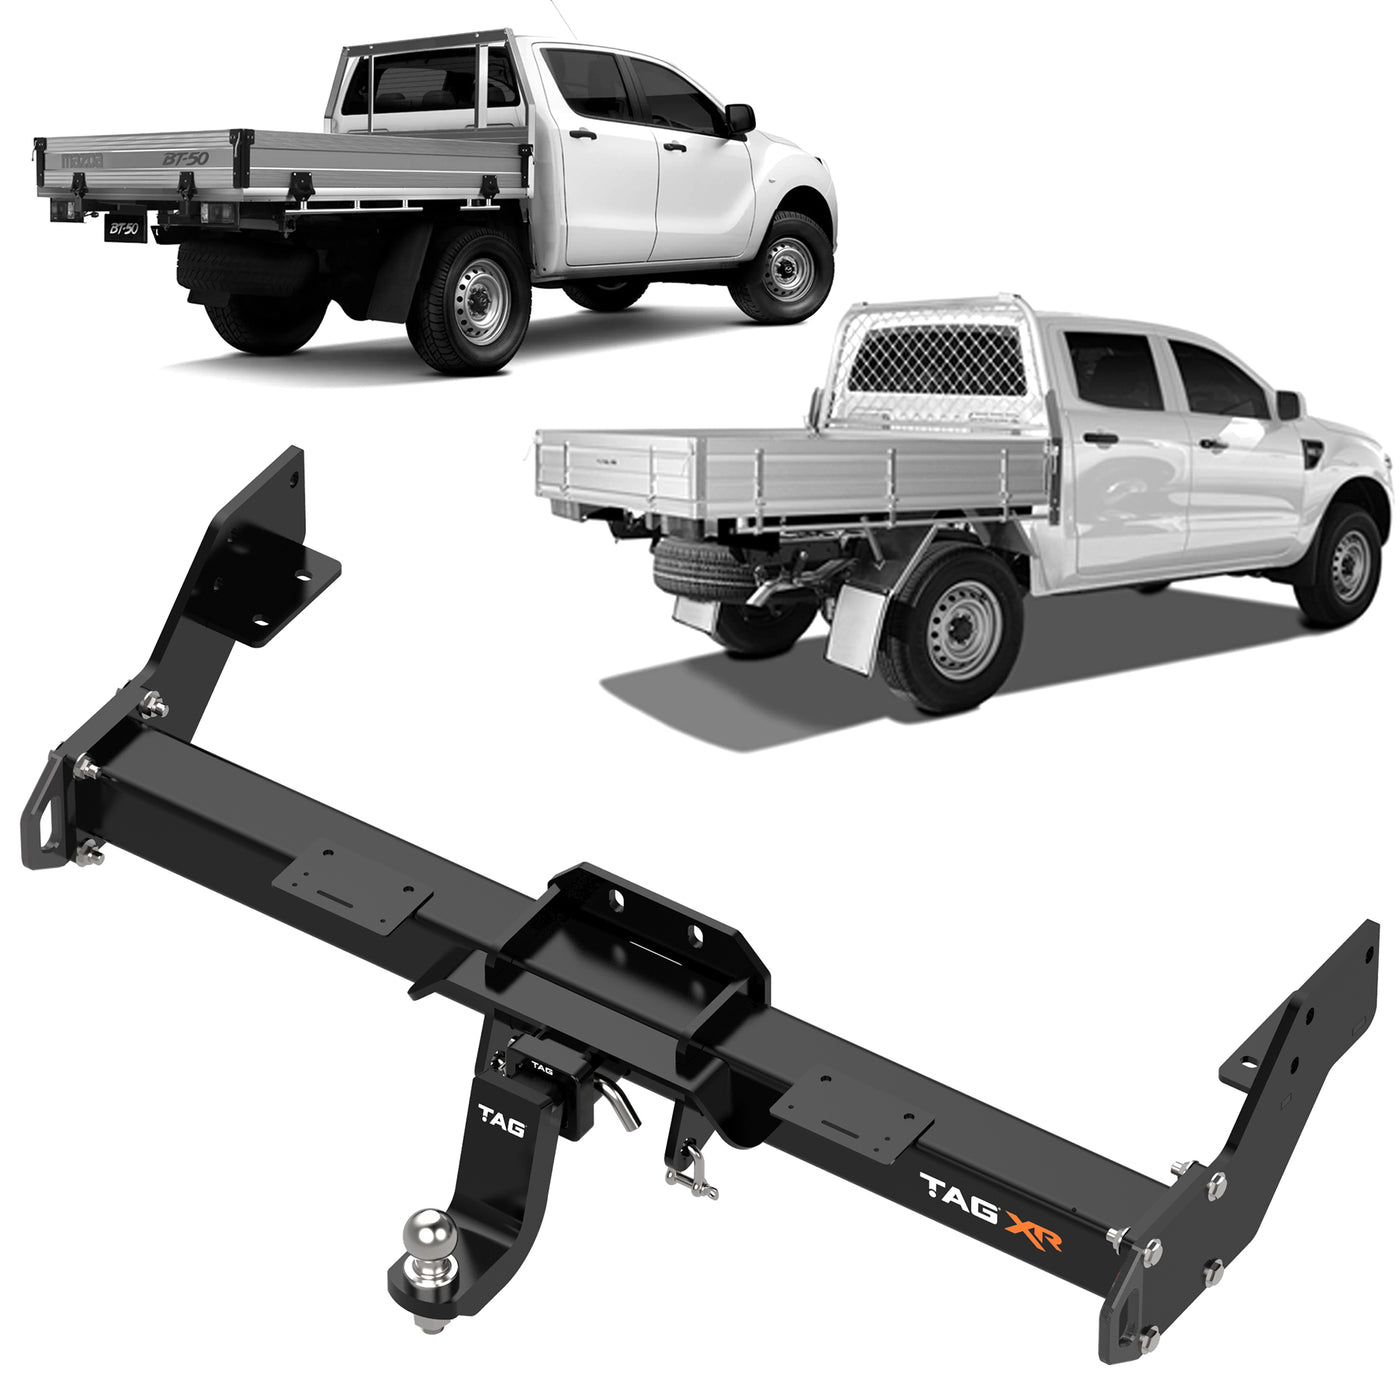 TAG 4x4 Recovery Towbar for Mazda BT-50 (09/2011 - 07/2020), Ford Ranger (09/2011 - 02/2022) - OZI4X4 PTY LTD